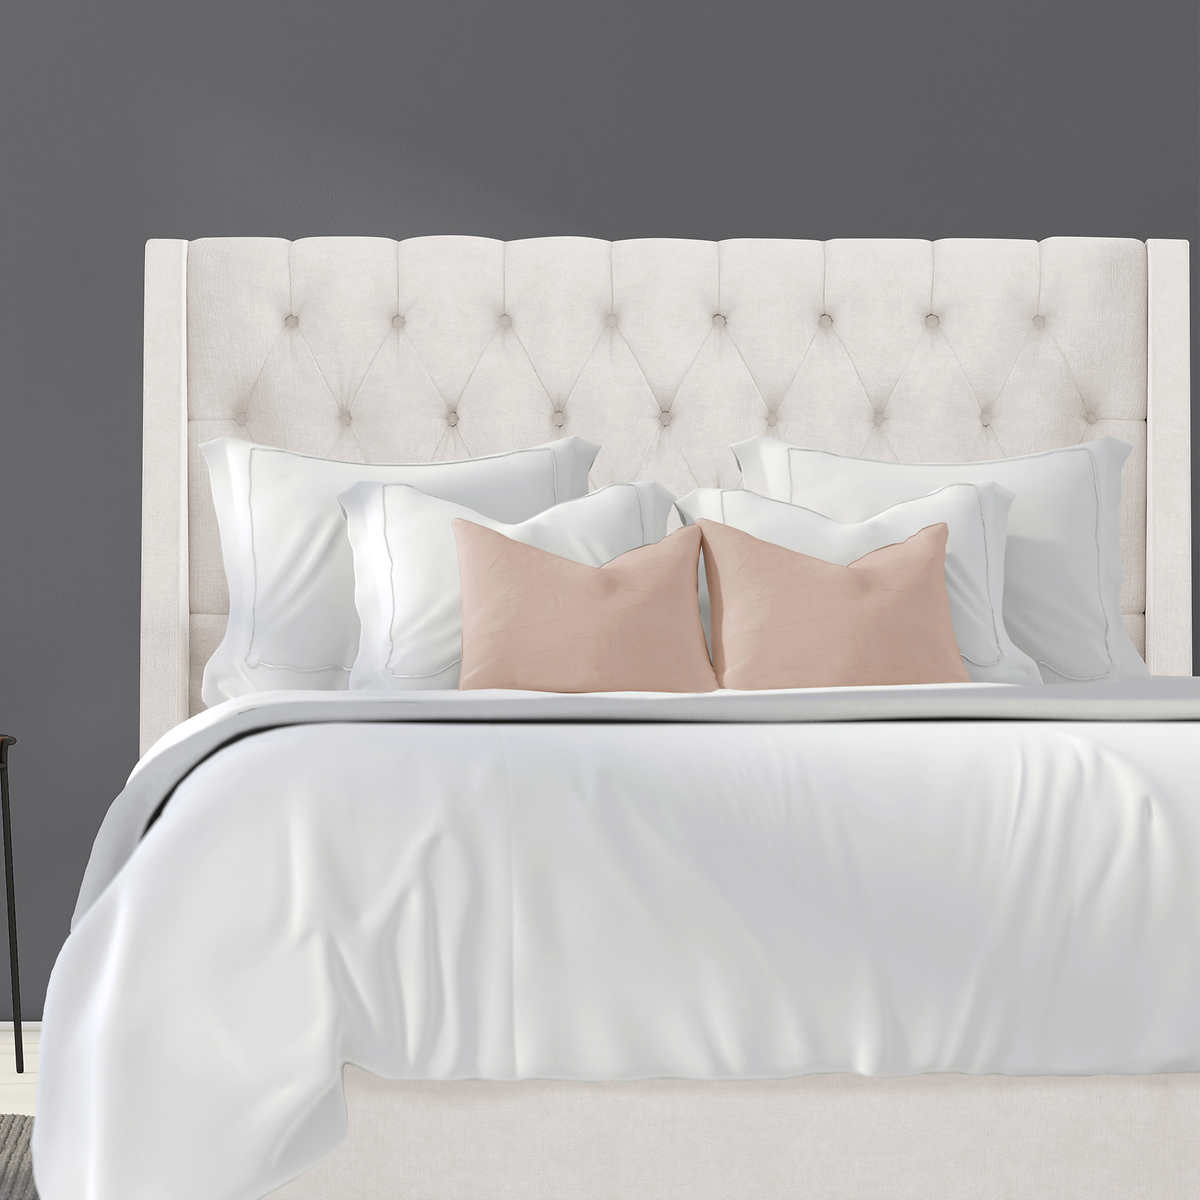 Thorton Tufted Wingback King Bed Costco, White Tufted King Bed